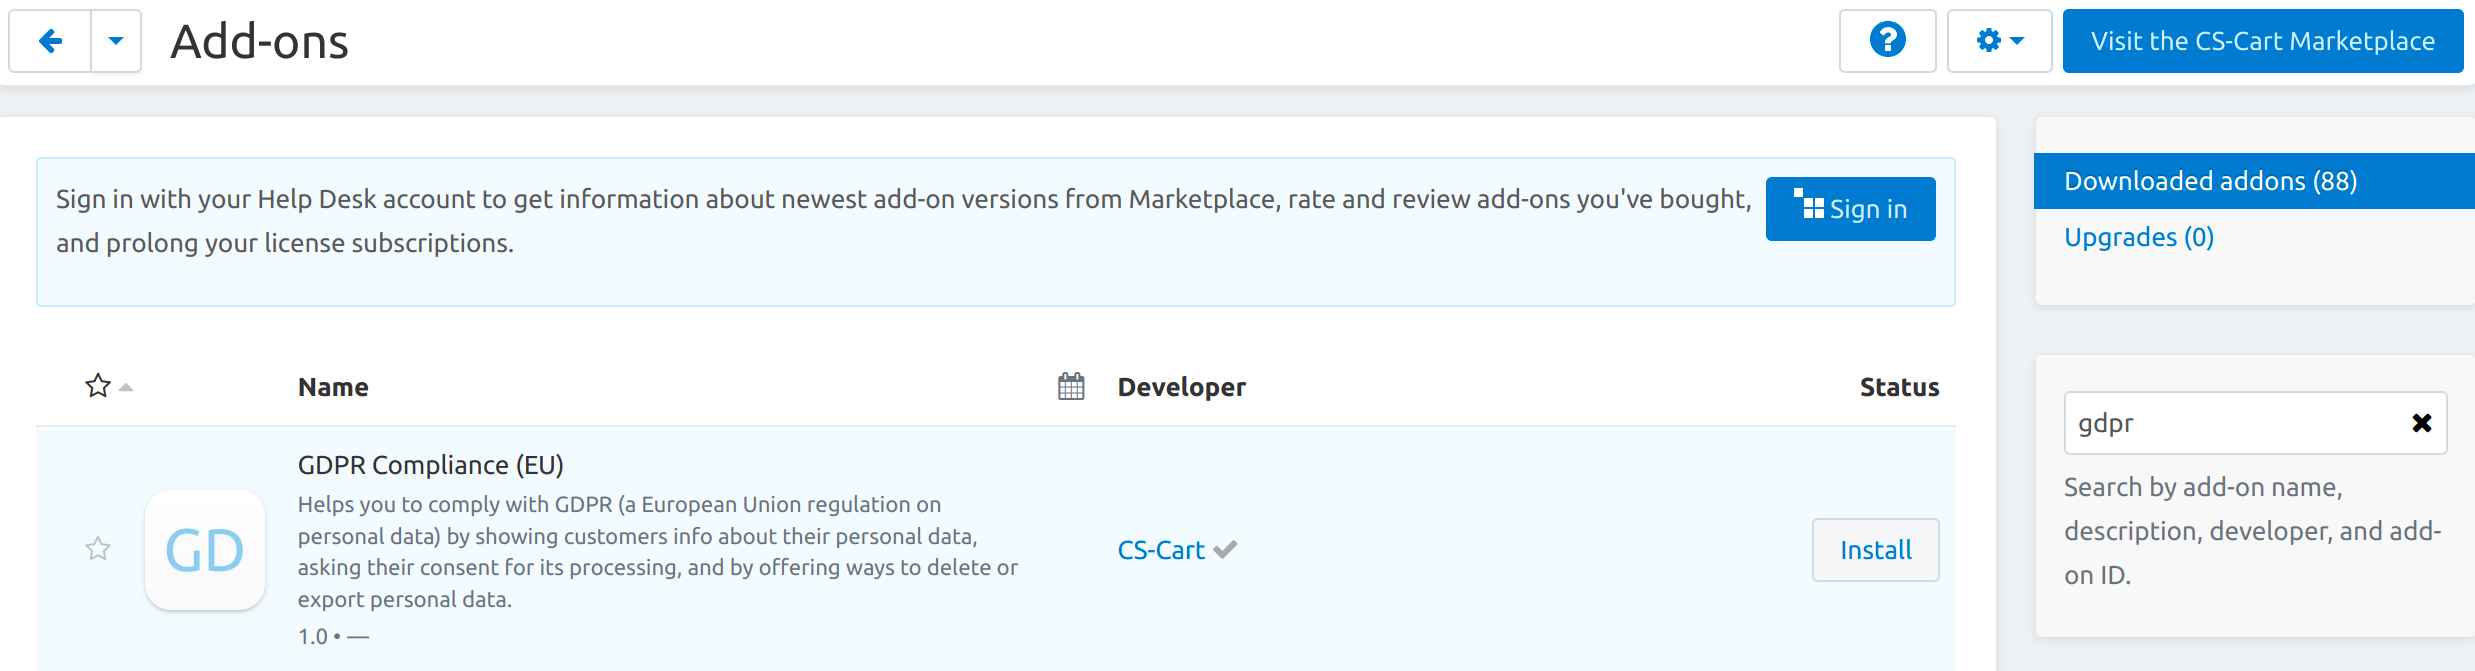 The GDPR Compliance add-on first appeared in CS-Cart and Multi-Vendor 4.7.4.